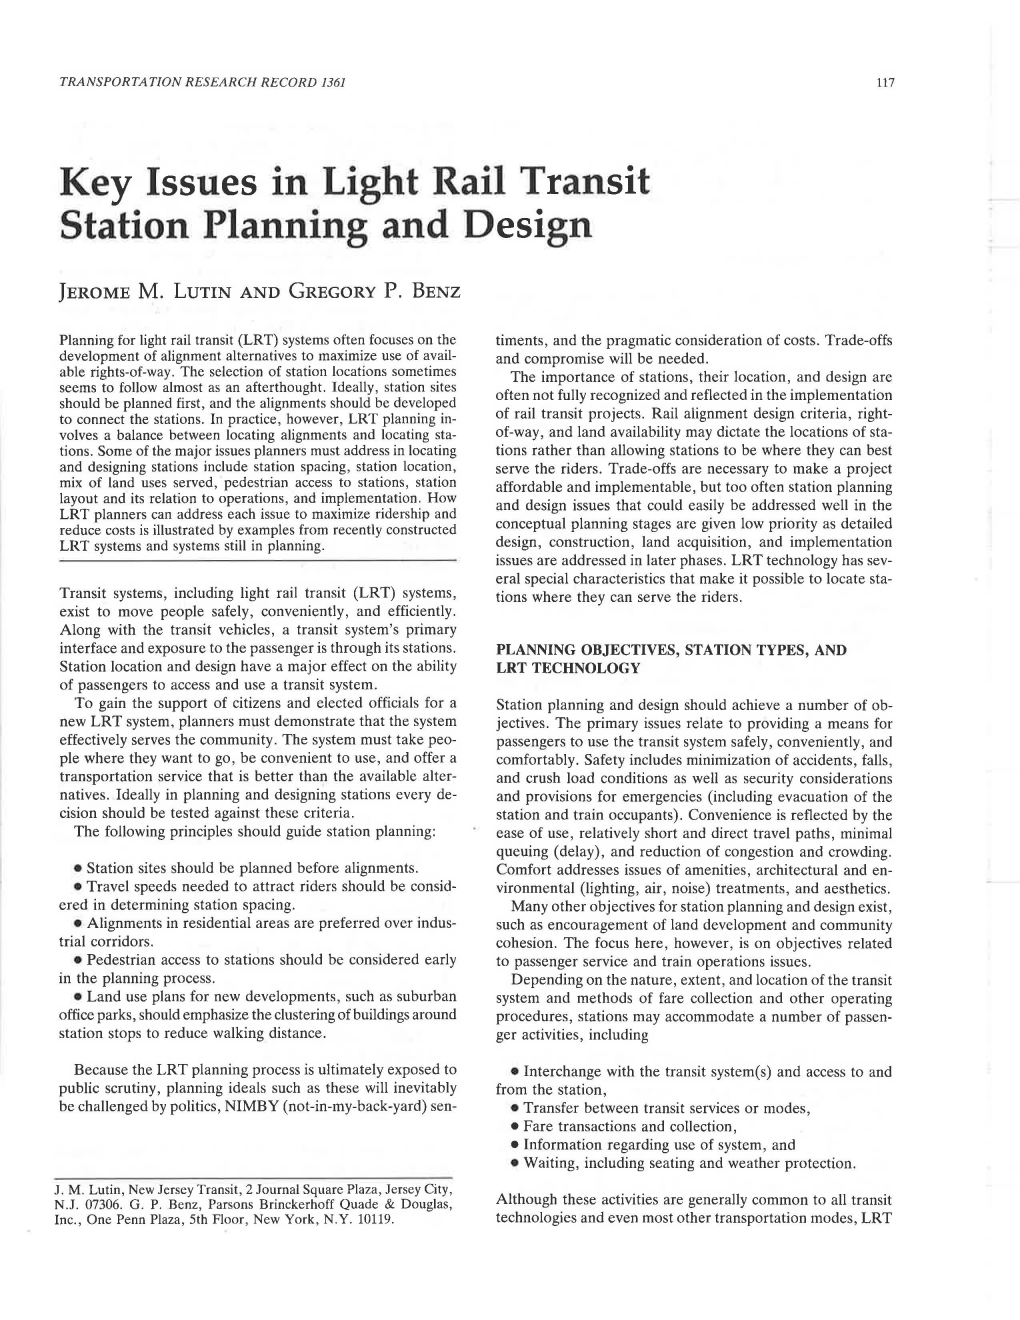 Key Issues in Light Rail Transit Station Planning and Design